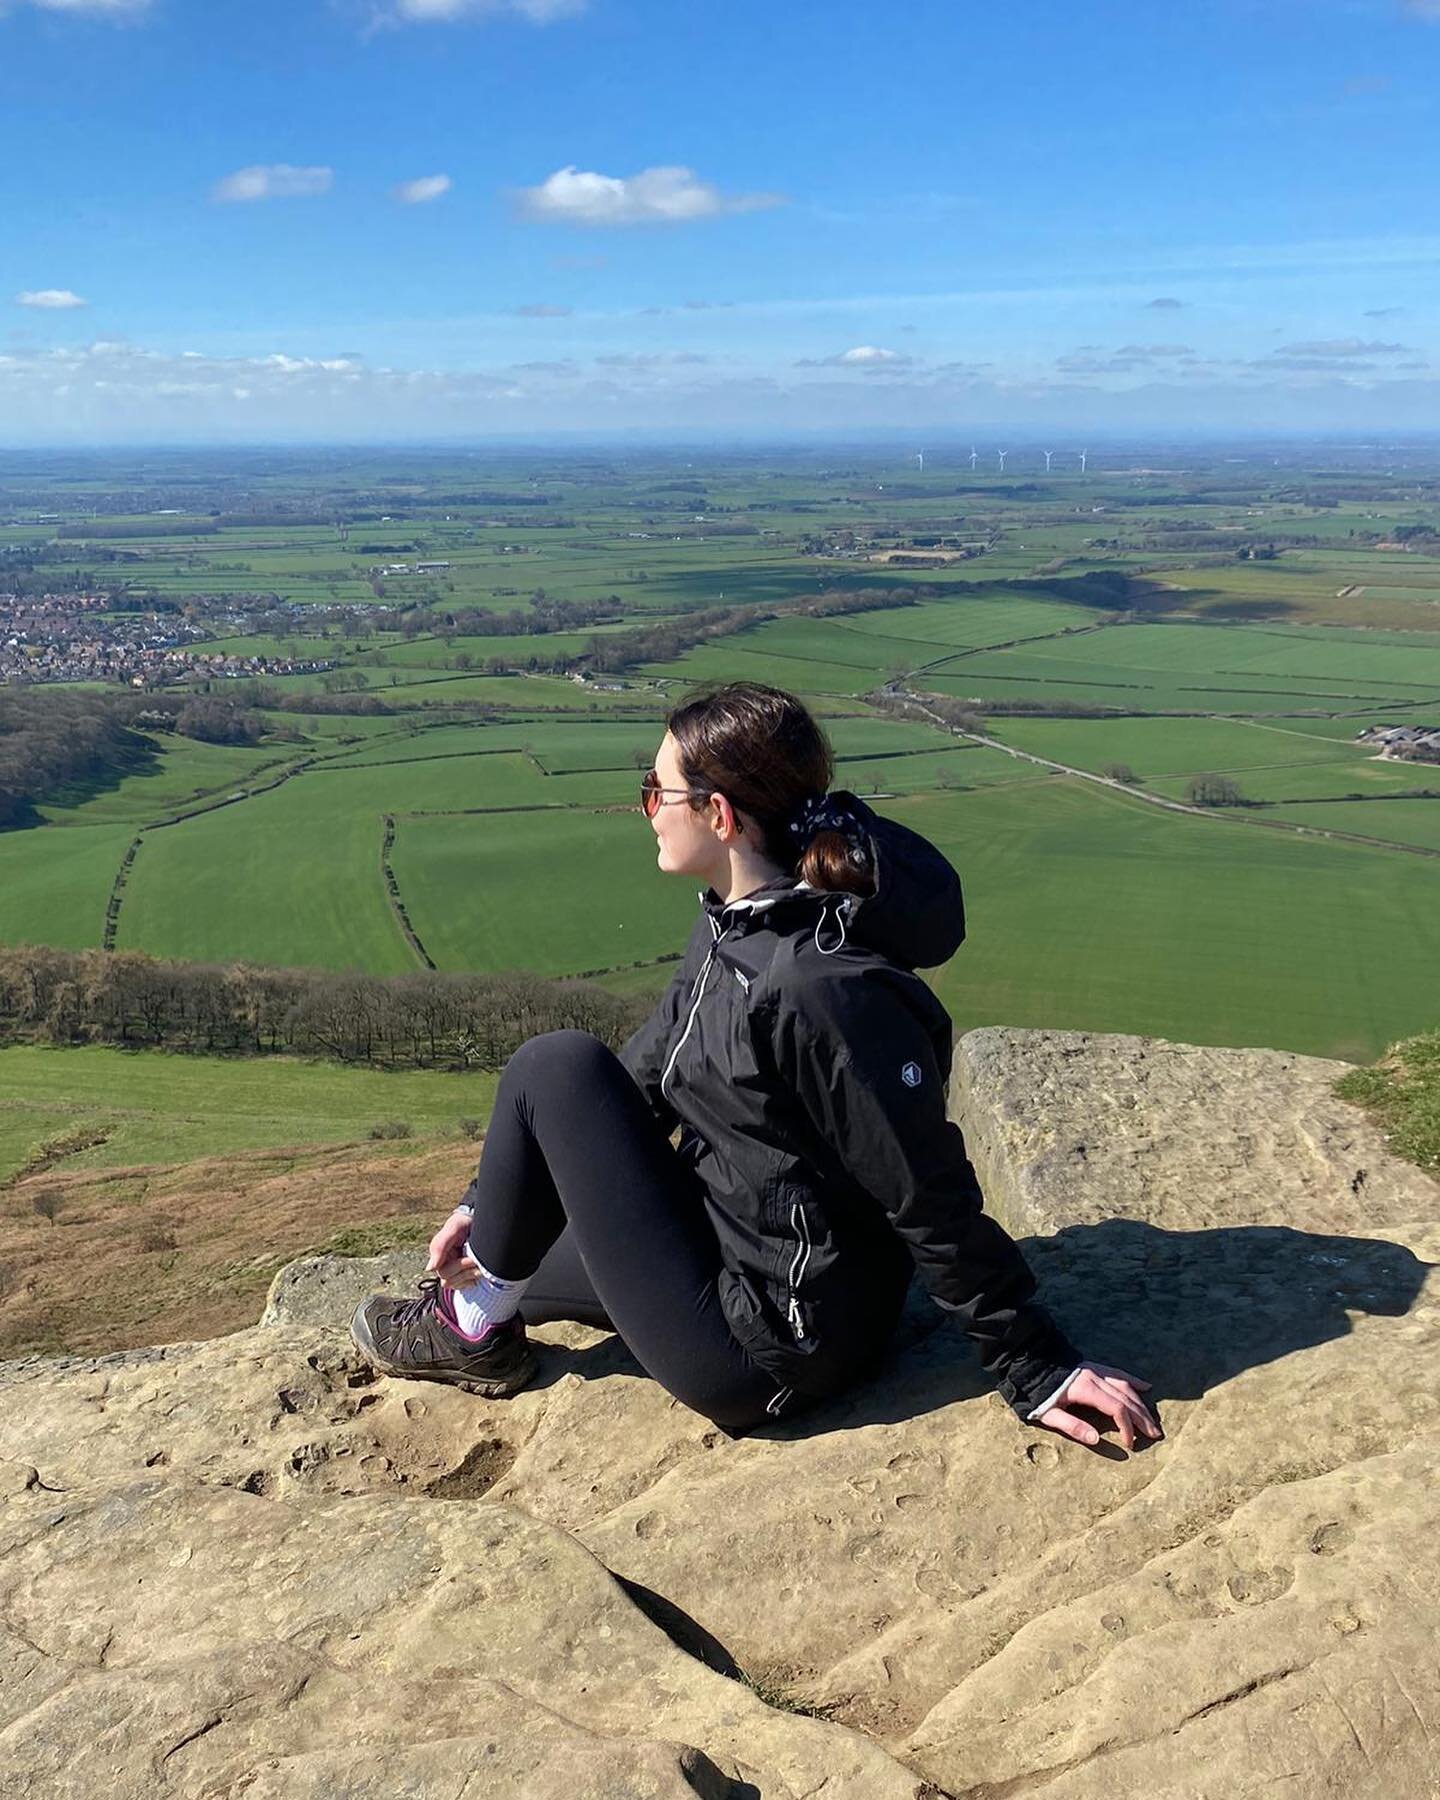 Im backk👏 After a week in Yorkshire Im home❤️ 

My weekly Sunday meditation class in the wellbeing centre will be back NEXT SUNDAY 16th APRIL📣 7:15-8:15pm

You can now book on my website to join all 3 x classes in April for a reduced price of &poun